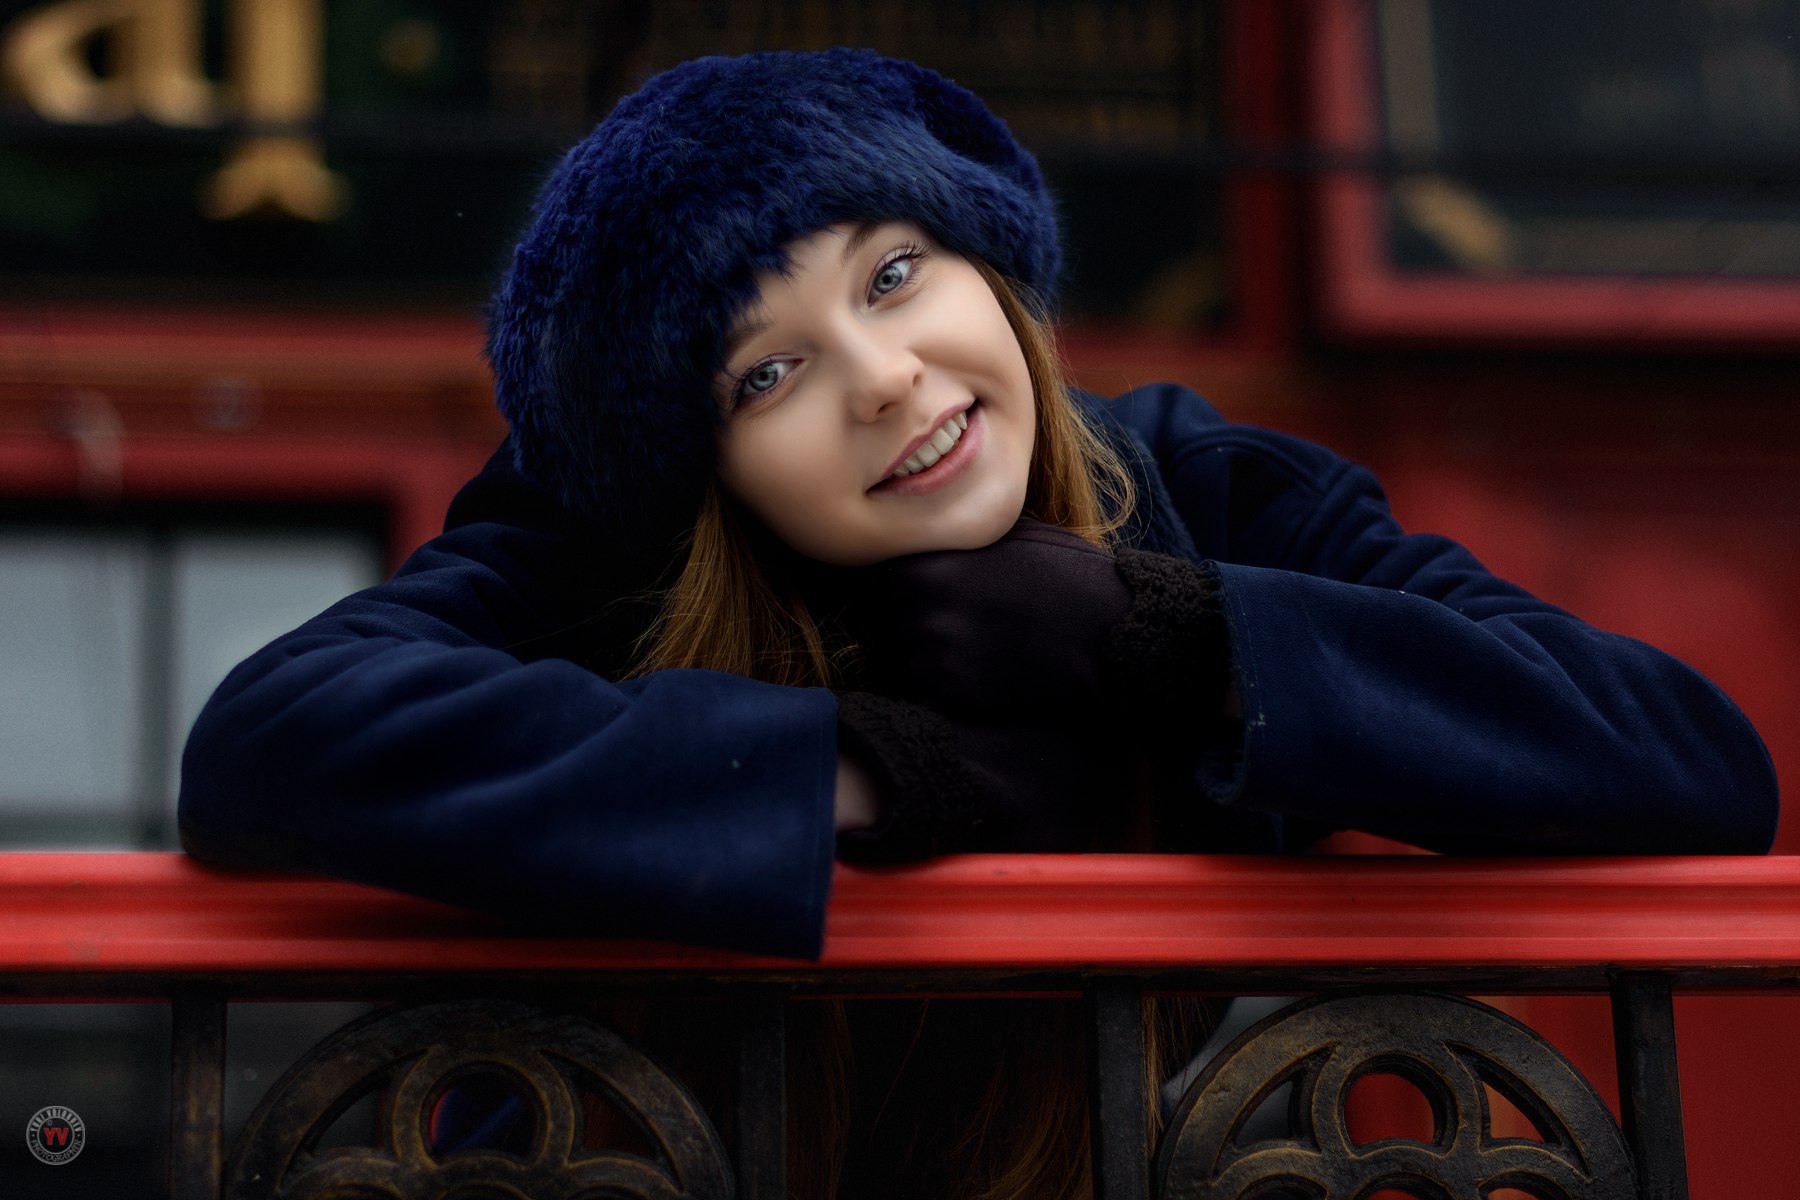 Women Model Brunette Looking At Viewer Smiling Face Hat Coats Gloves Railings Depth Of Field Outdoor 1800x1200